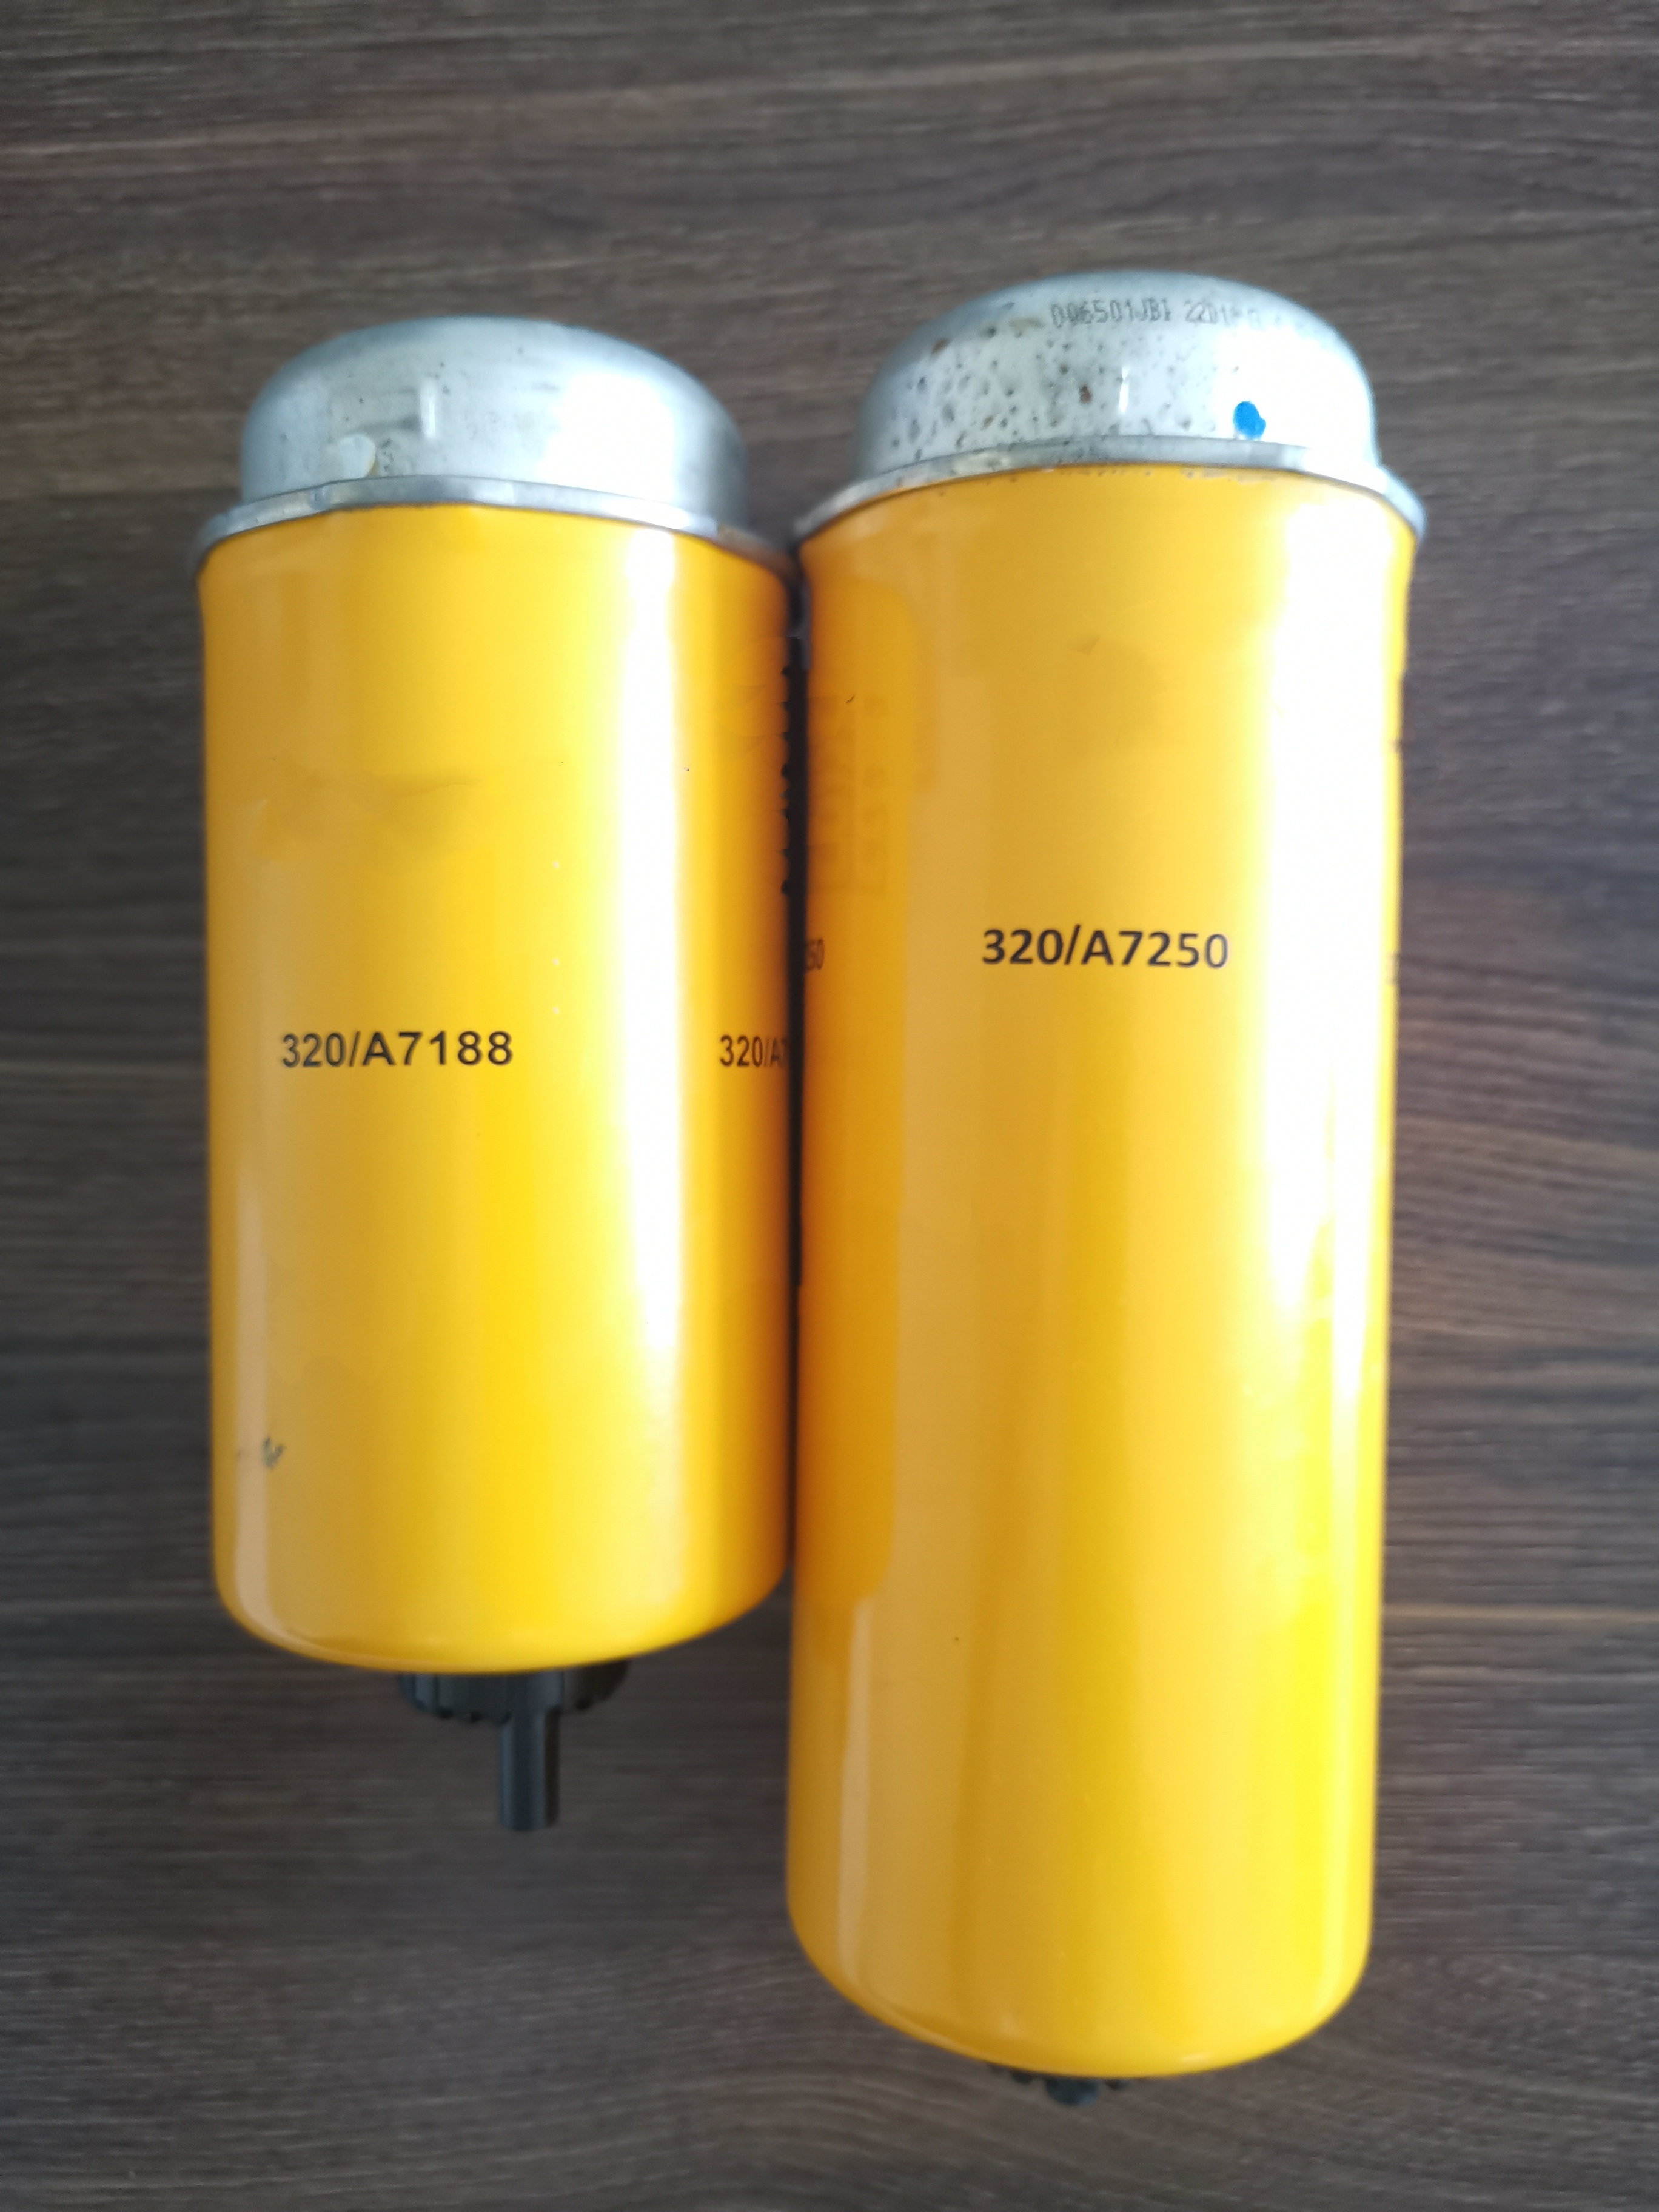 GreenFilter Pressure 320/A7188 320A7188 320/A7250 320A7250 Fuel Water Separator